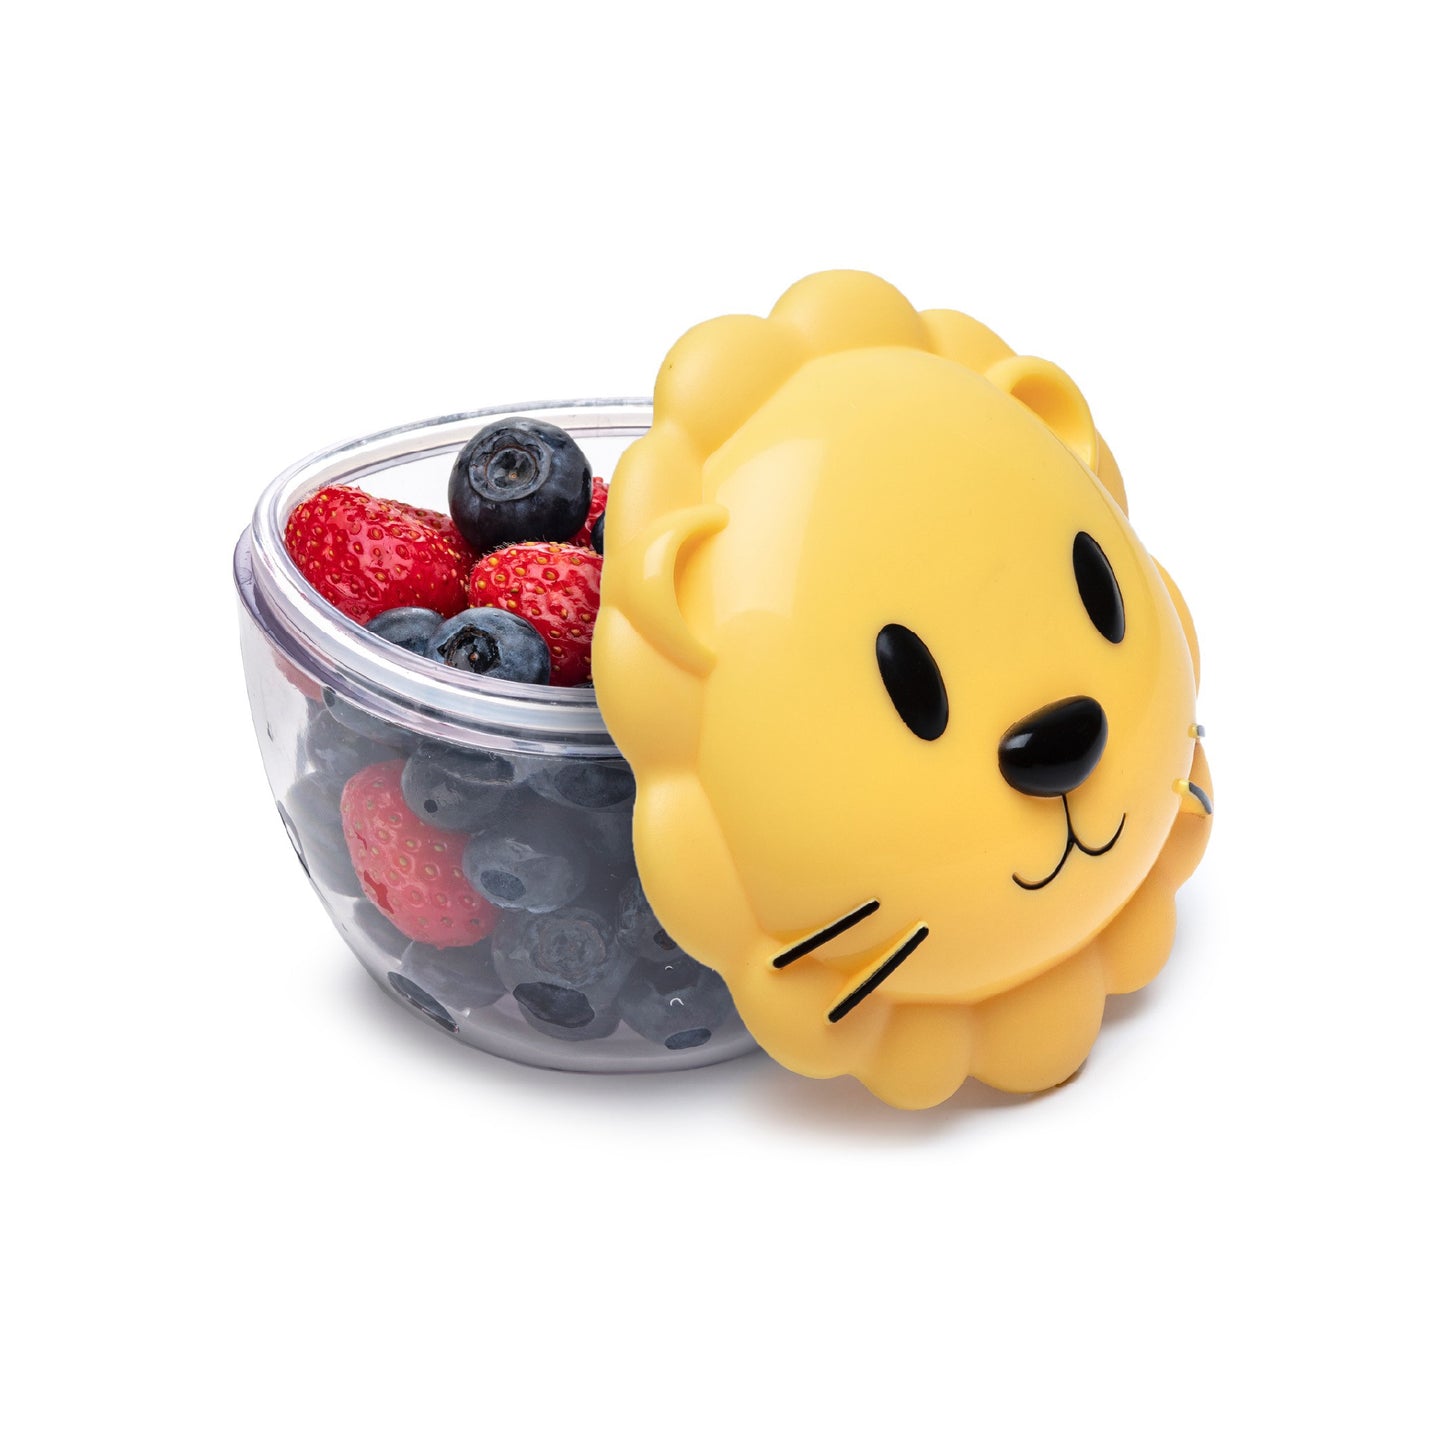 Melii Lion Snack Containers with Lids - Safe and Playful Food Storage for Toddlers and Kids